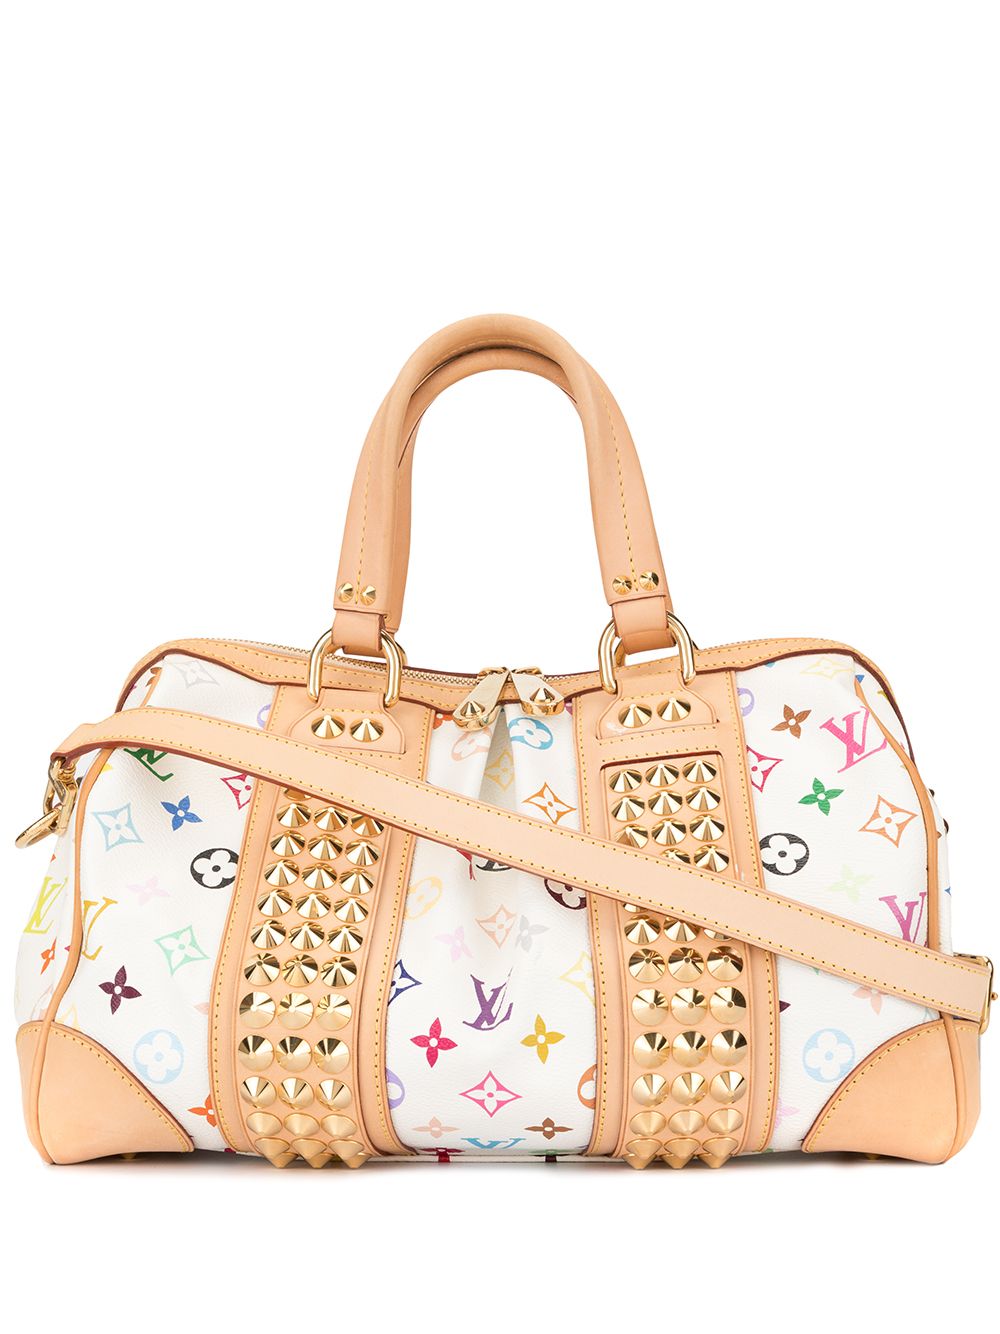 фото Louis vuitton сумка courtney mm pre-owned